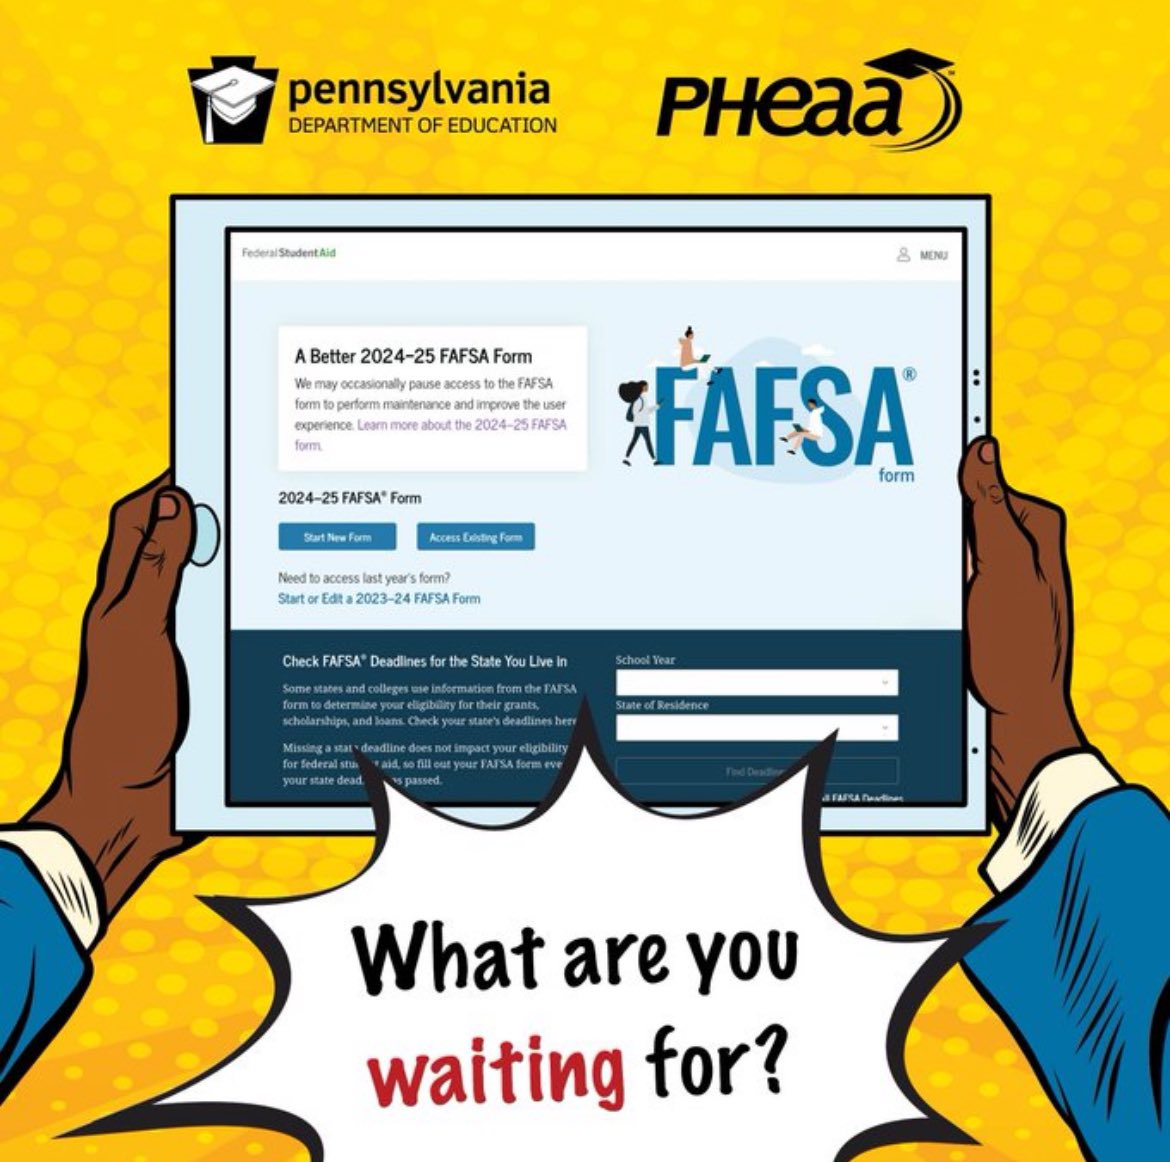 Neighbors and #YoungestConstituents - @PHEAAaid has extended the submission deadline for the Free Application for Federal Student Aid (FAFSA®), for the PA State Grant, to June 1, 2024. For more information, please visit: pheaa.org/fafsa.